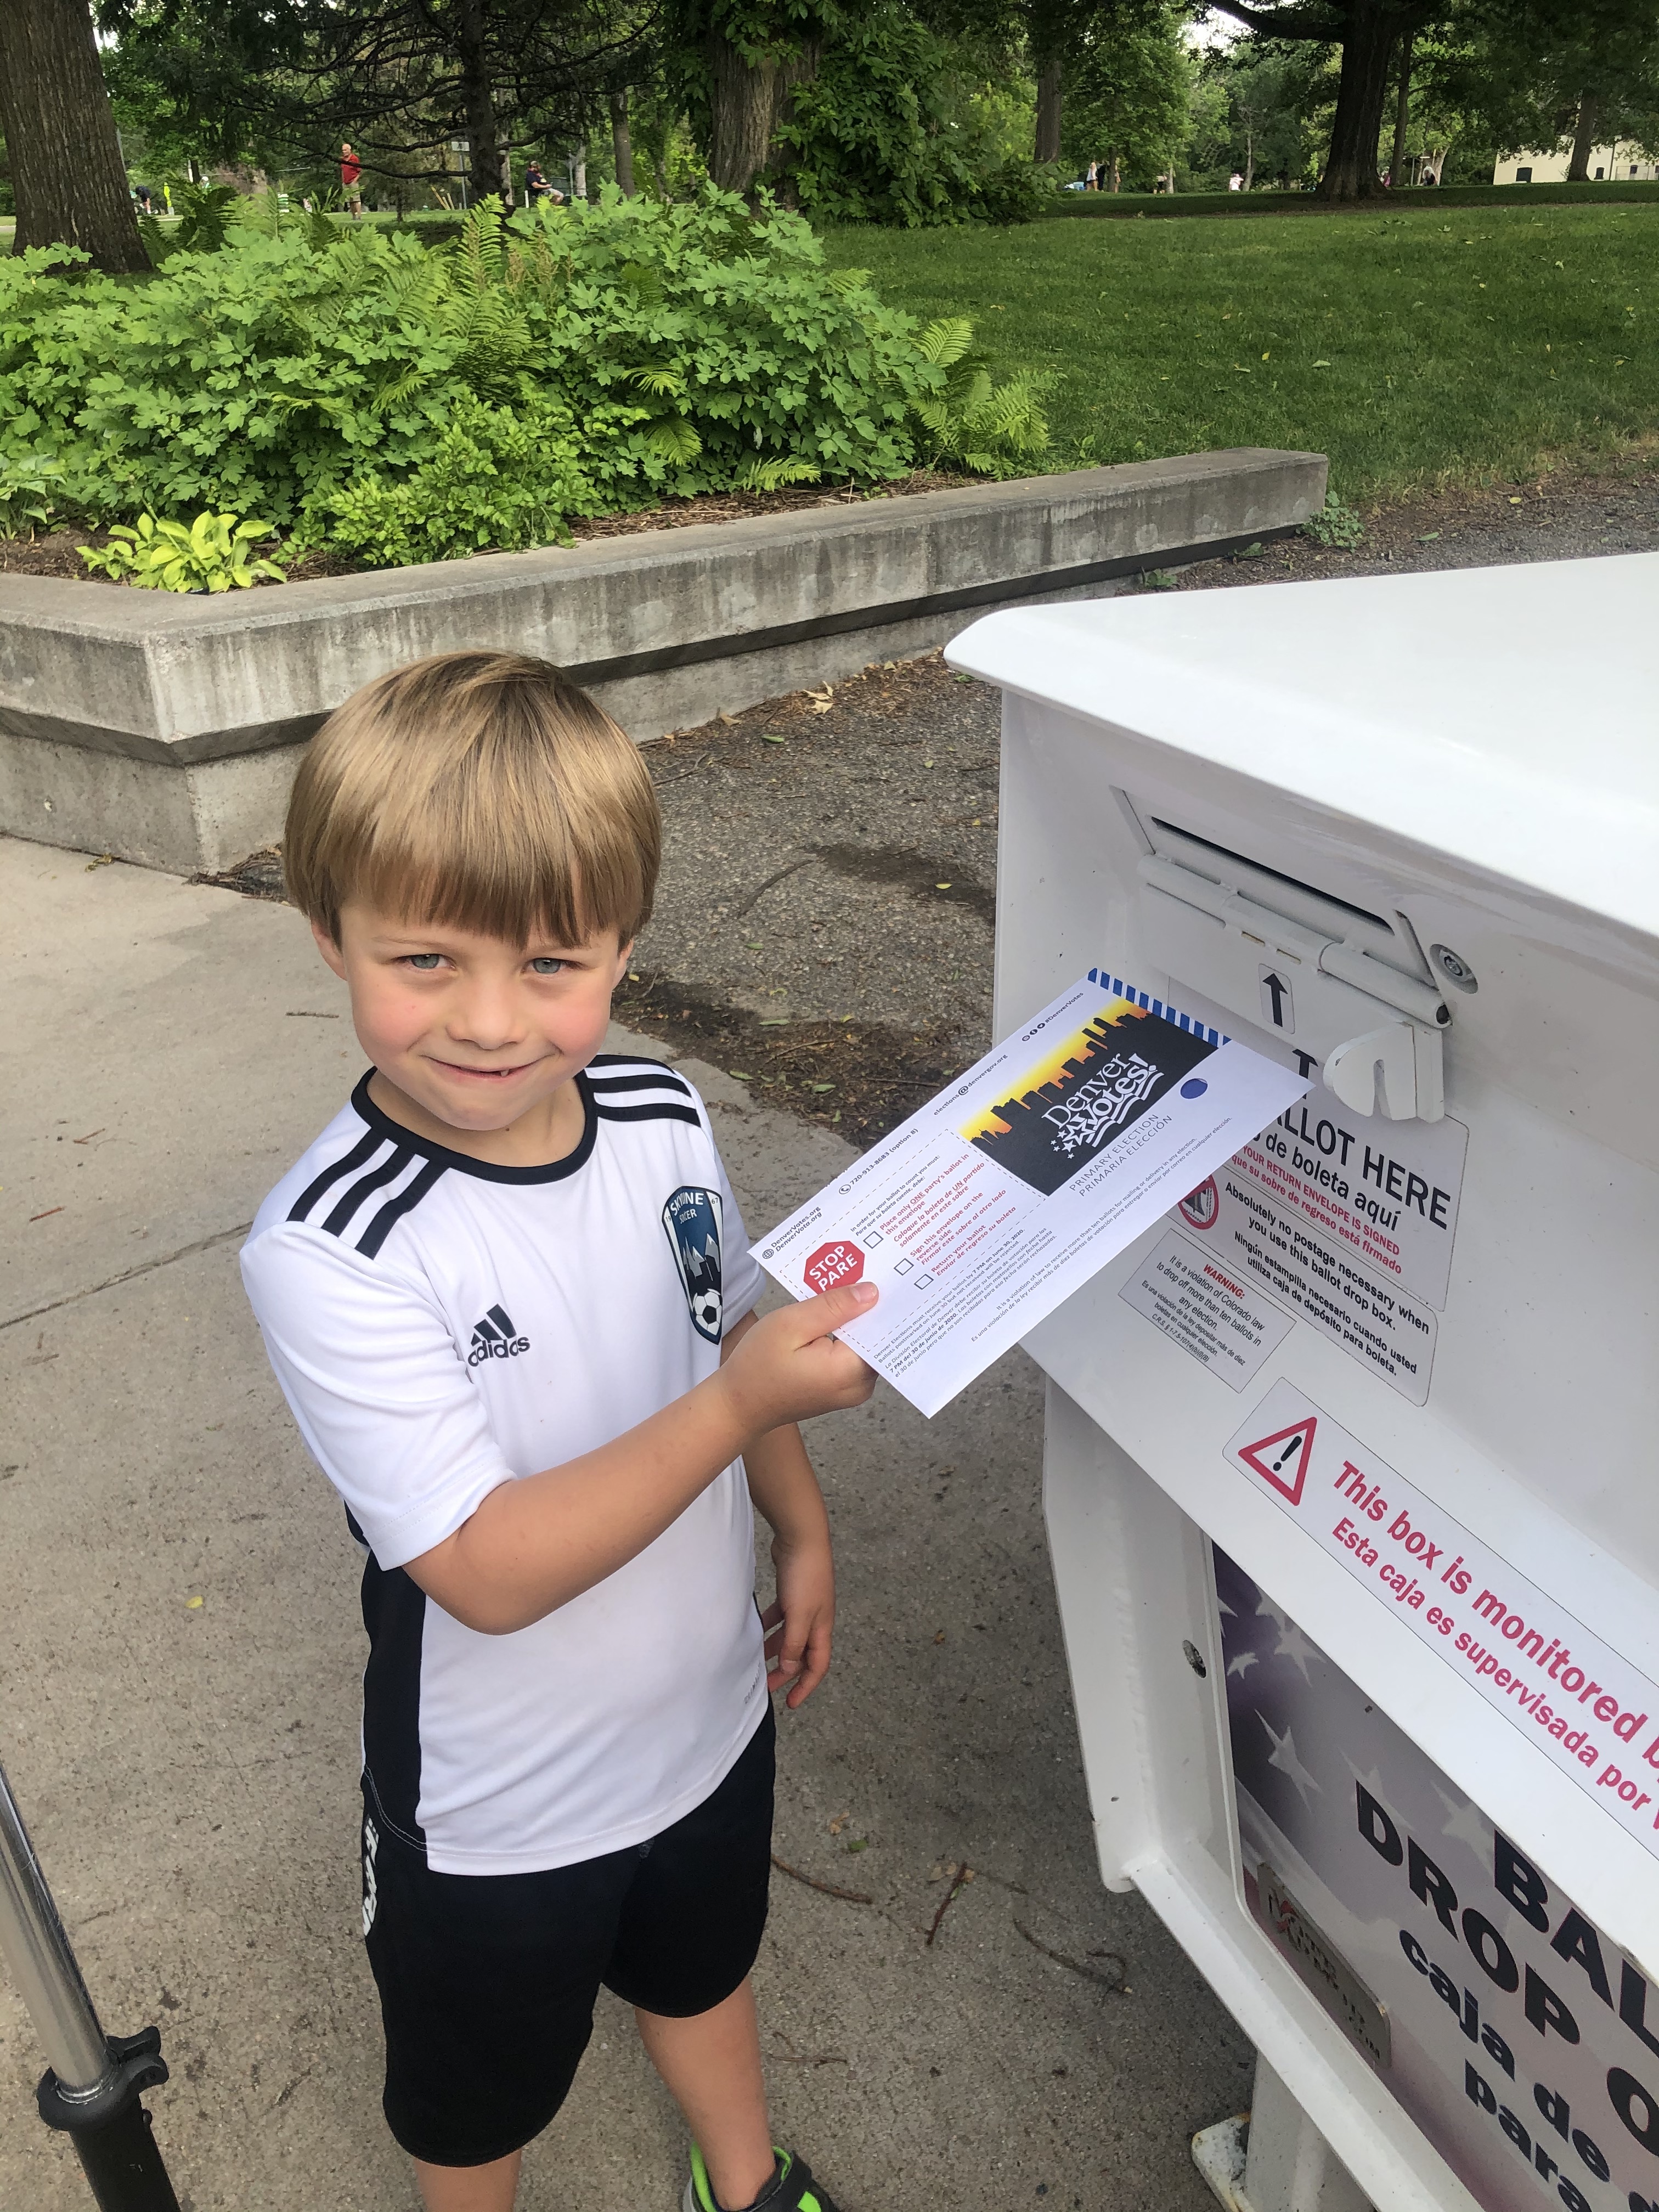 McReynolds' son Kenton, 7, helping her vote during Colorado's primary election this summer. (Courtesy of Amber McReynolds)